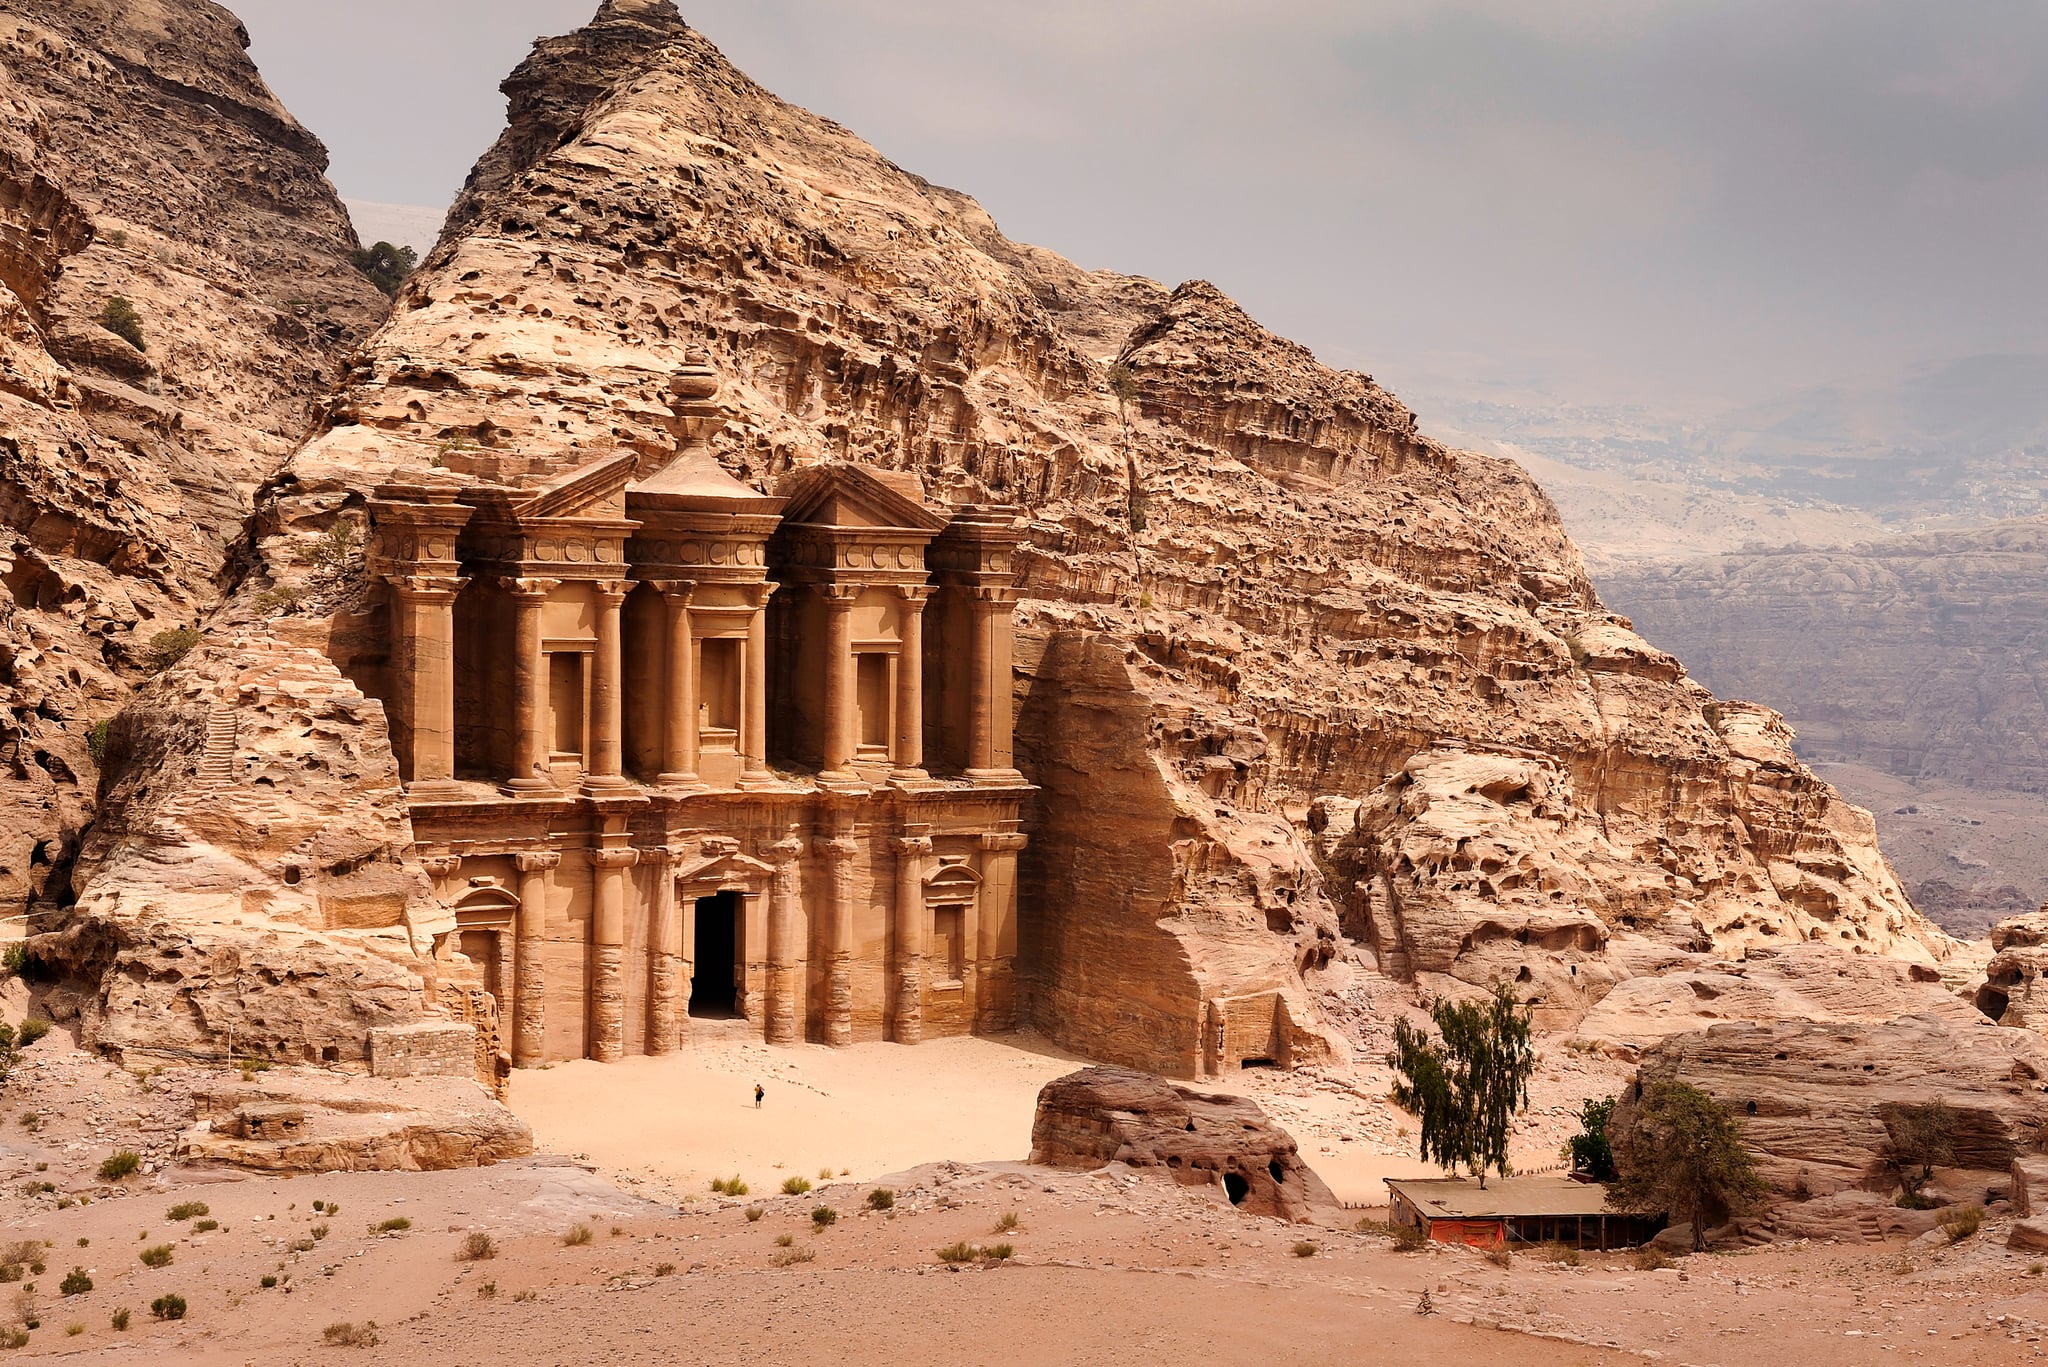 Things to do in Jordan: 10 reasons to visit this beautiful country